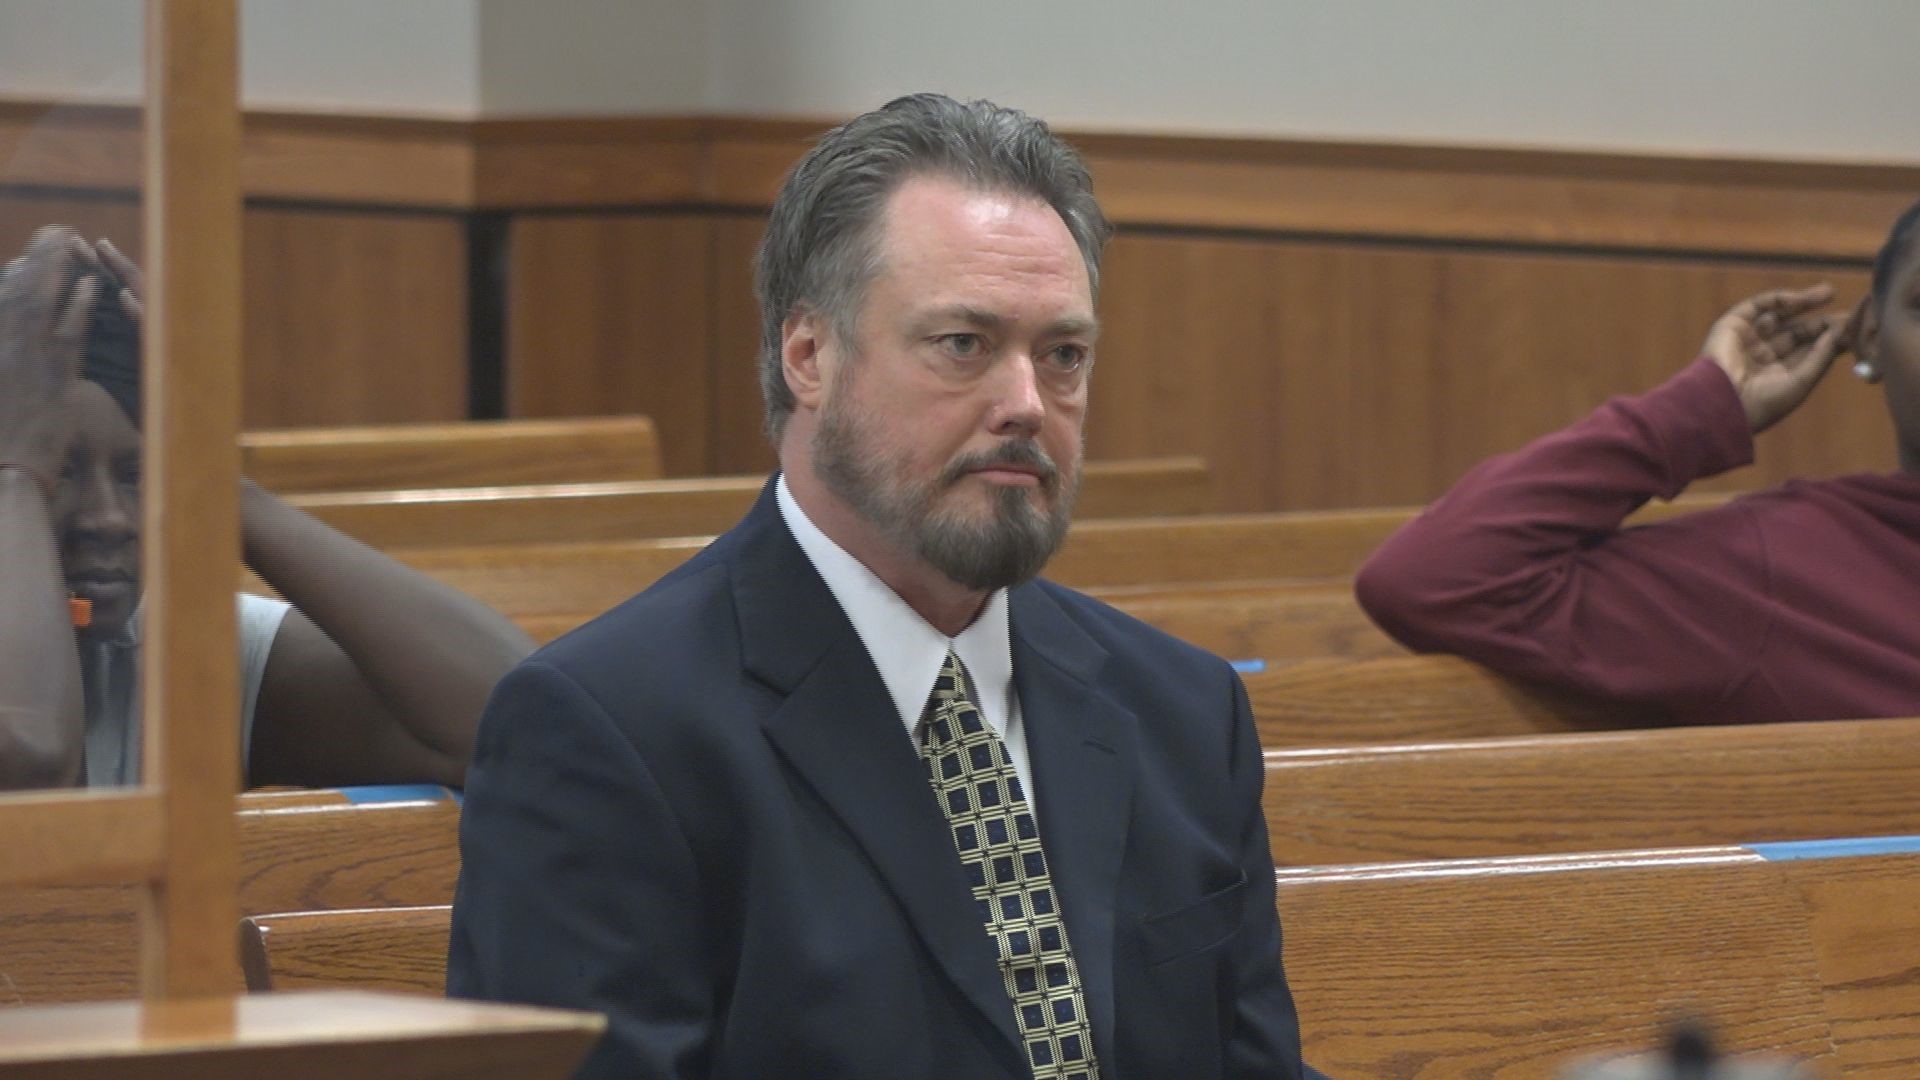 Donald Beck Jr. pleaded guilty to one count of misdemeanor allowing conduct on licensed premises. All of the other charges he faced were dismissed.